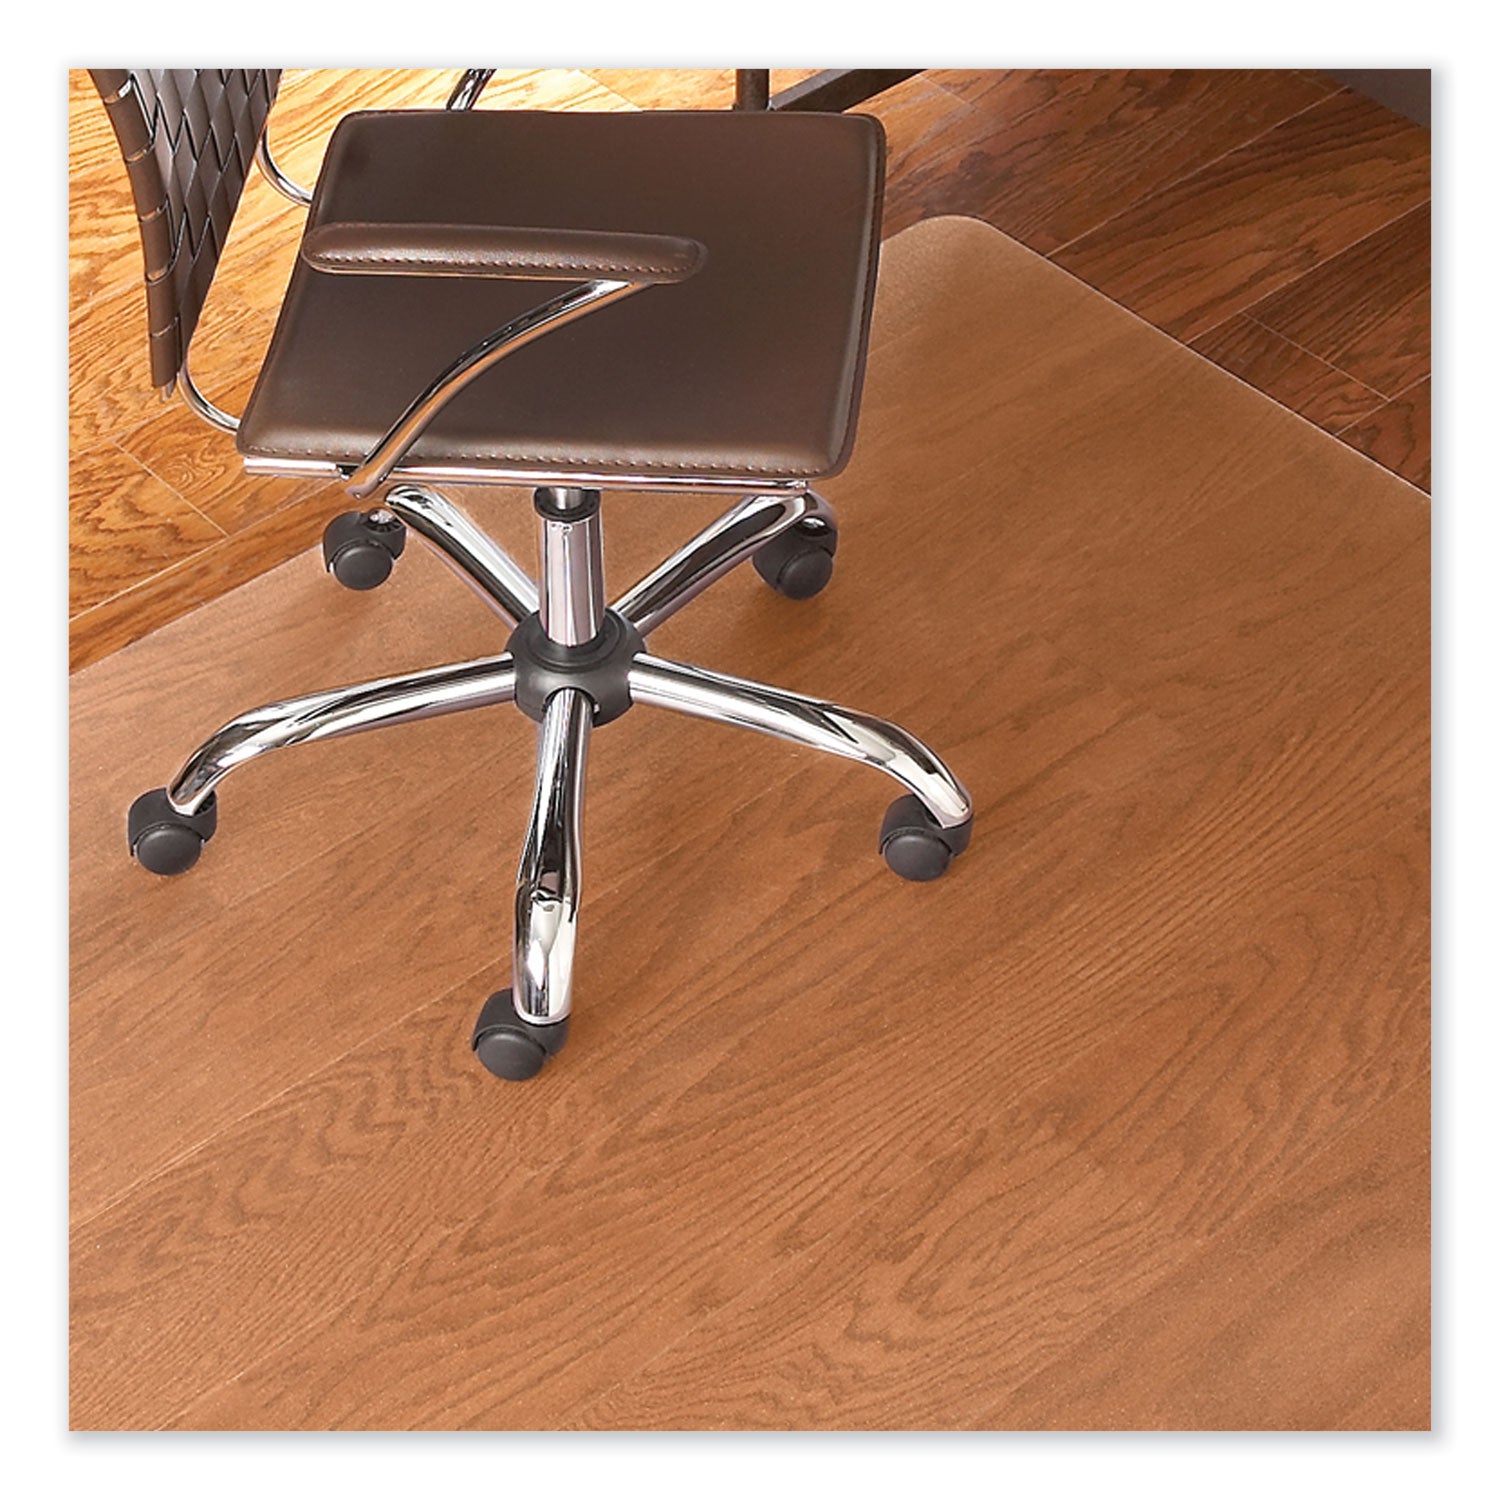 everlife-chair-mat-for-hard-floors-heavy-use-rectangular-60-x-72-clear-ships-in-4-6-business-days_esr132731 - 3